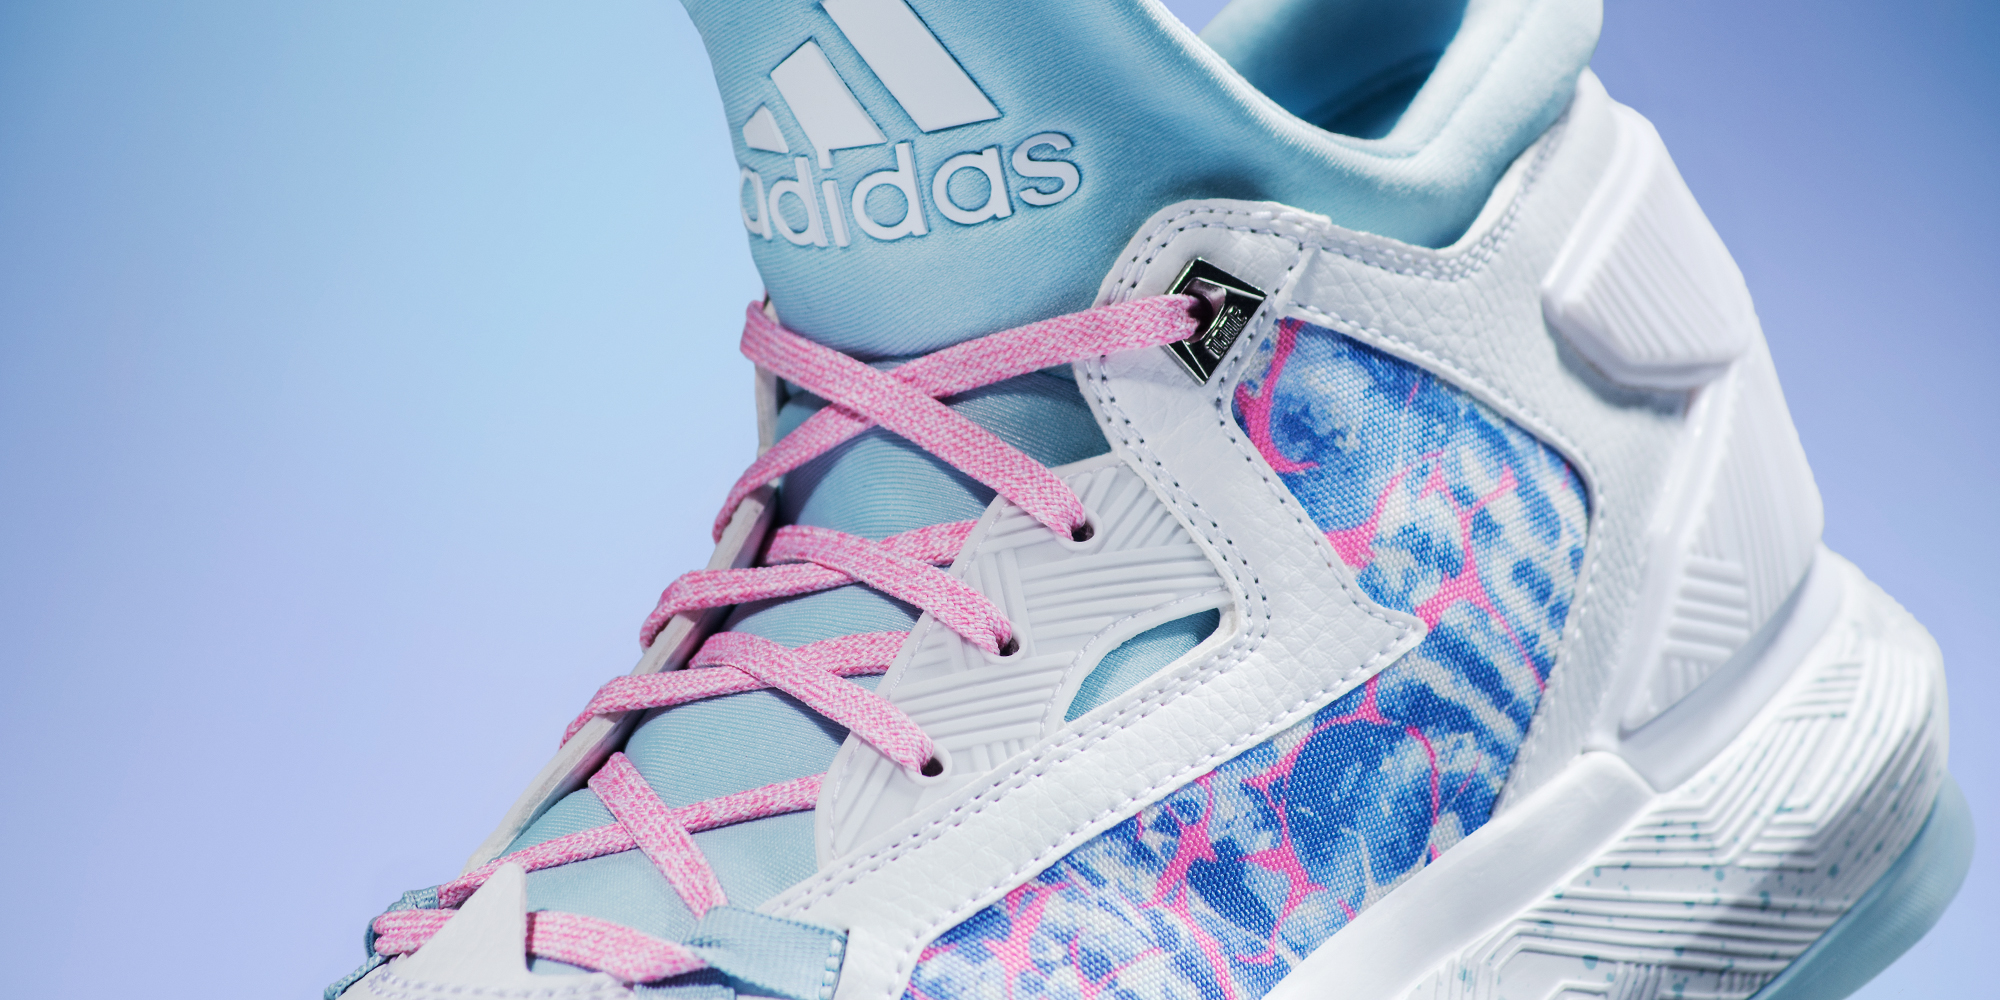 adidas Easter Footwear Collection